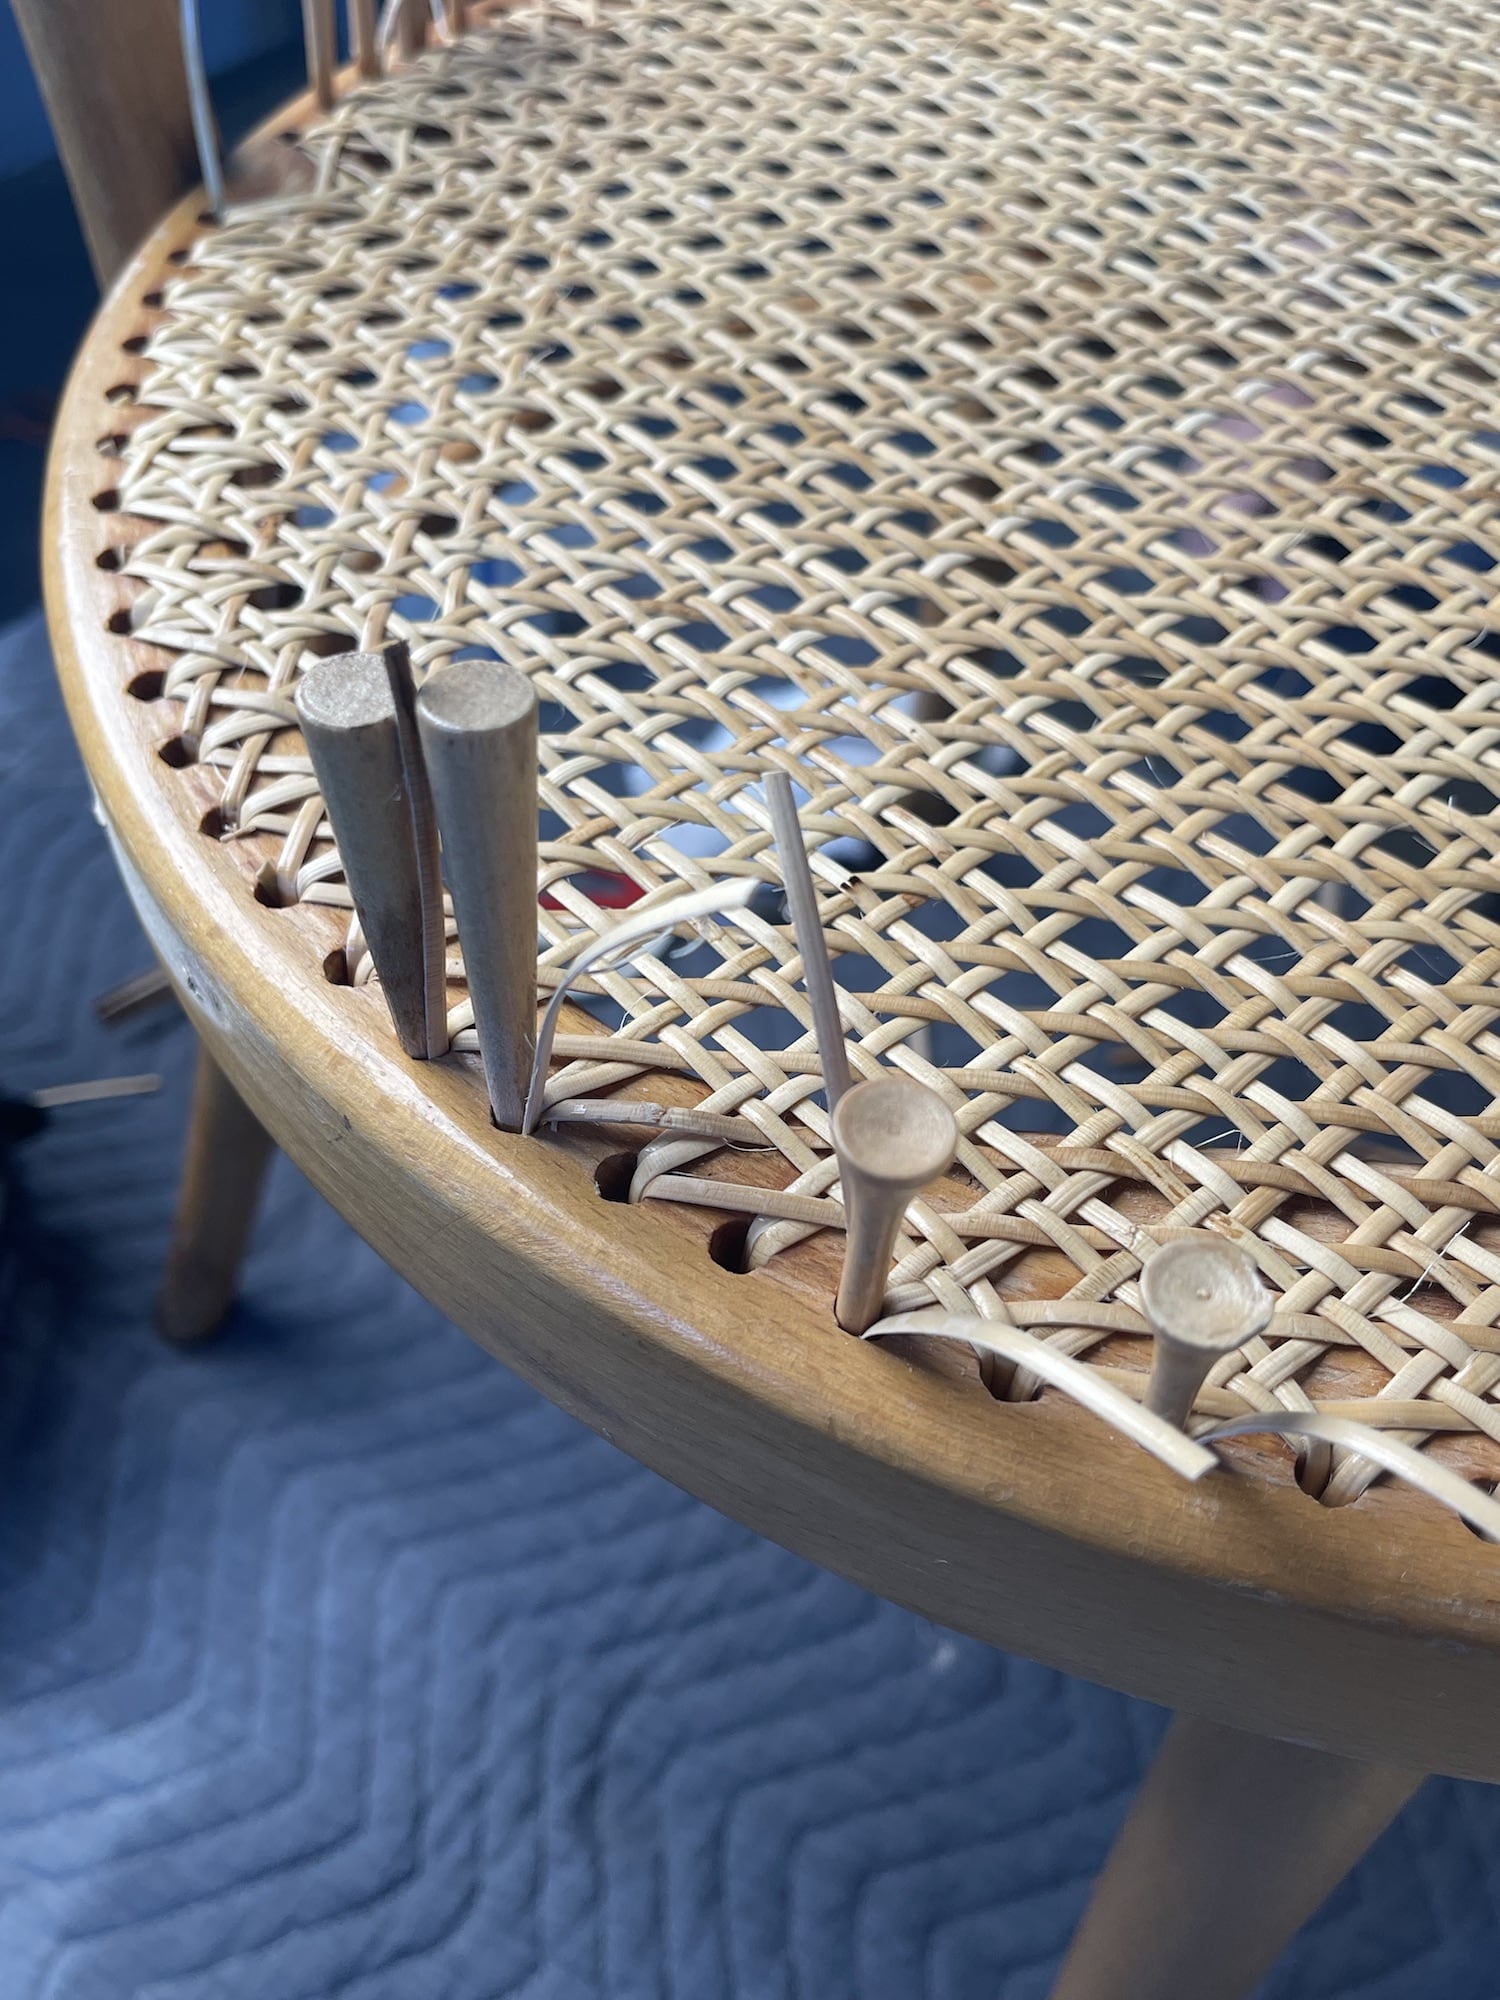 Chair hand caning by David Johnson for Craft Video Dictionary Allied Woodshop East Los Angeles California 